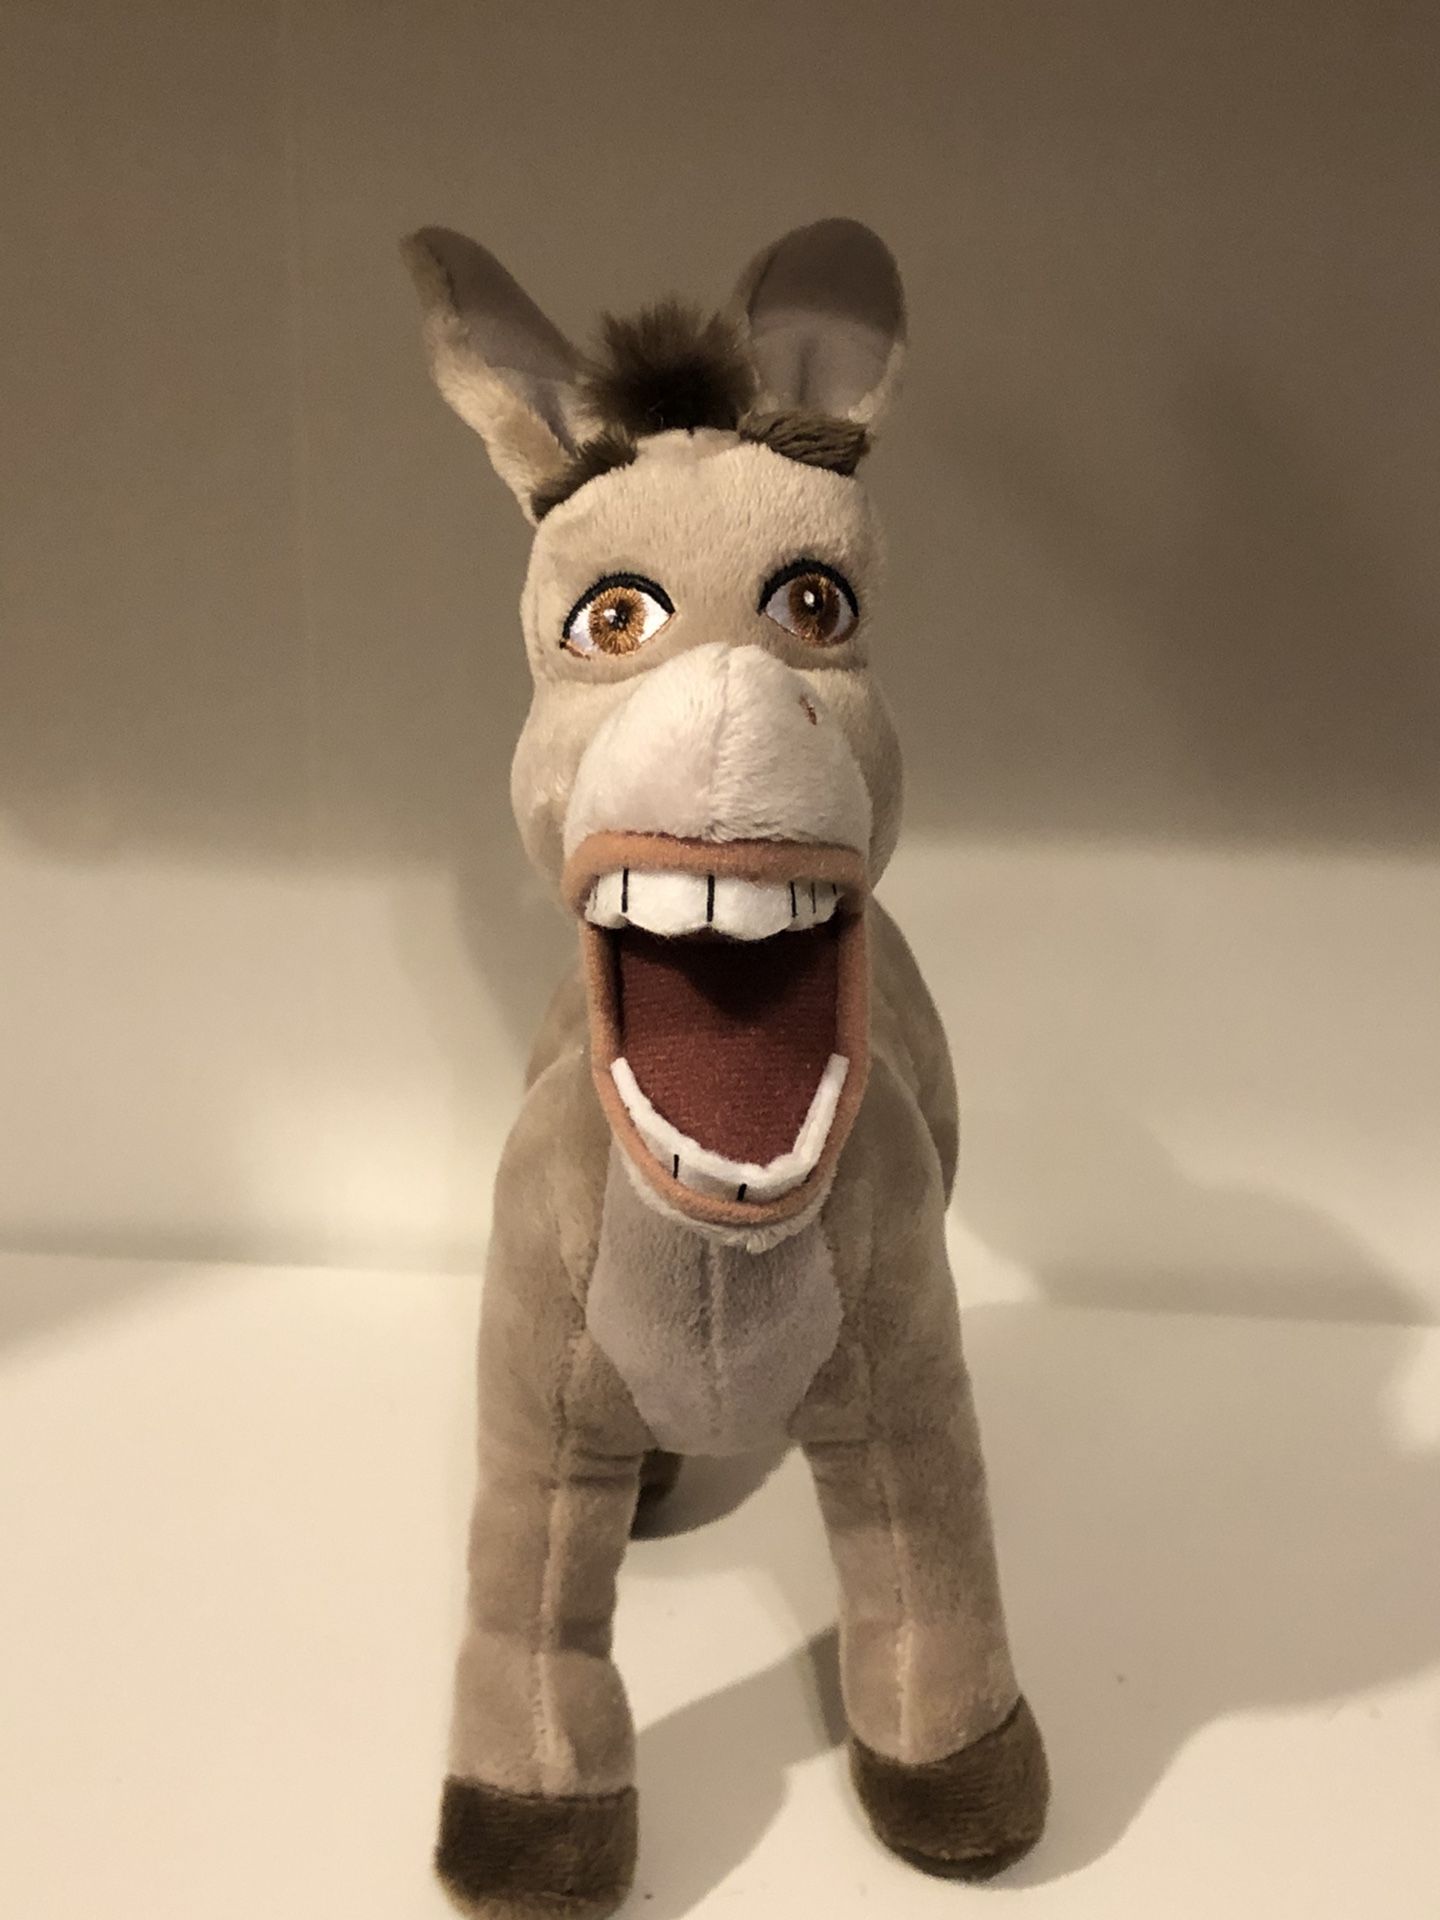 Disney Shrek Donkey plush plushie doll toy sale! 11” from nose to end of tail!